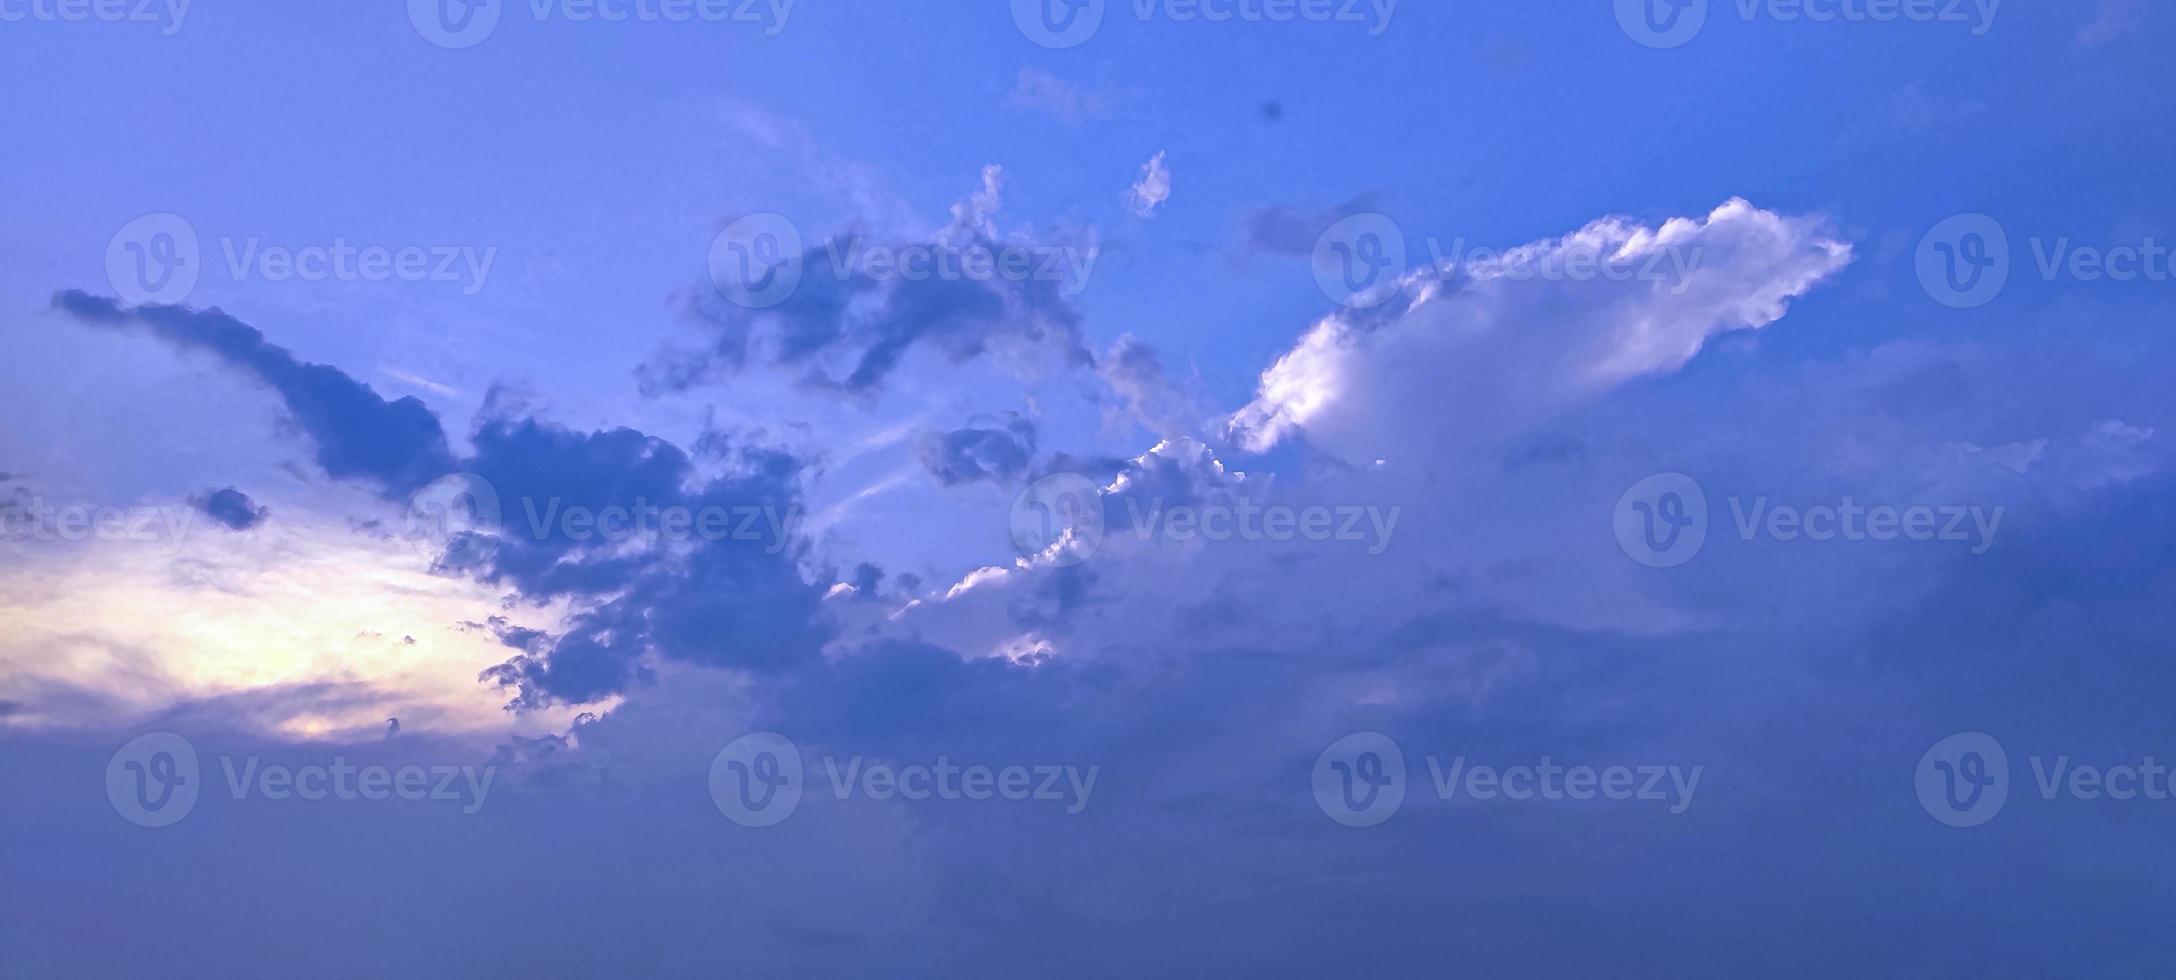 Clouds in the sky with the sun setting blue sky white and black cloud photo